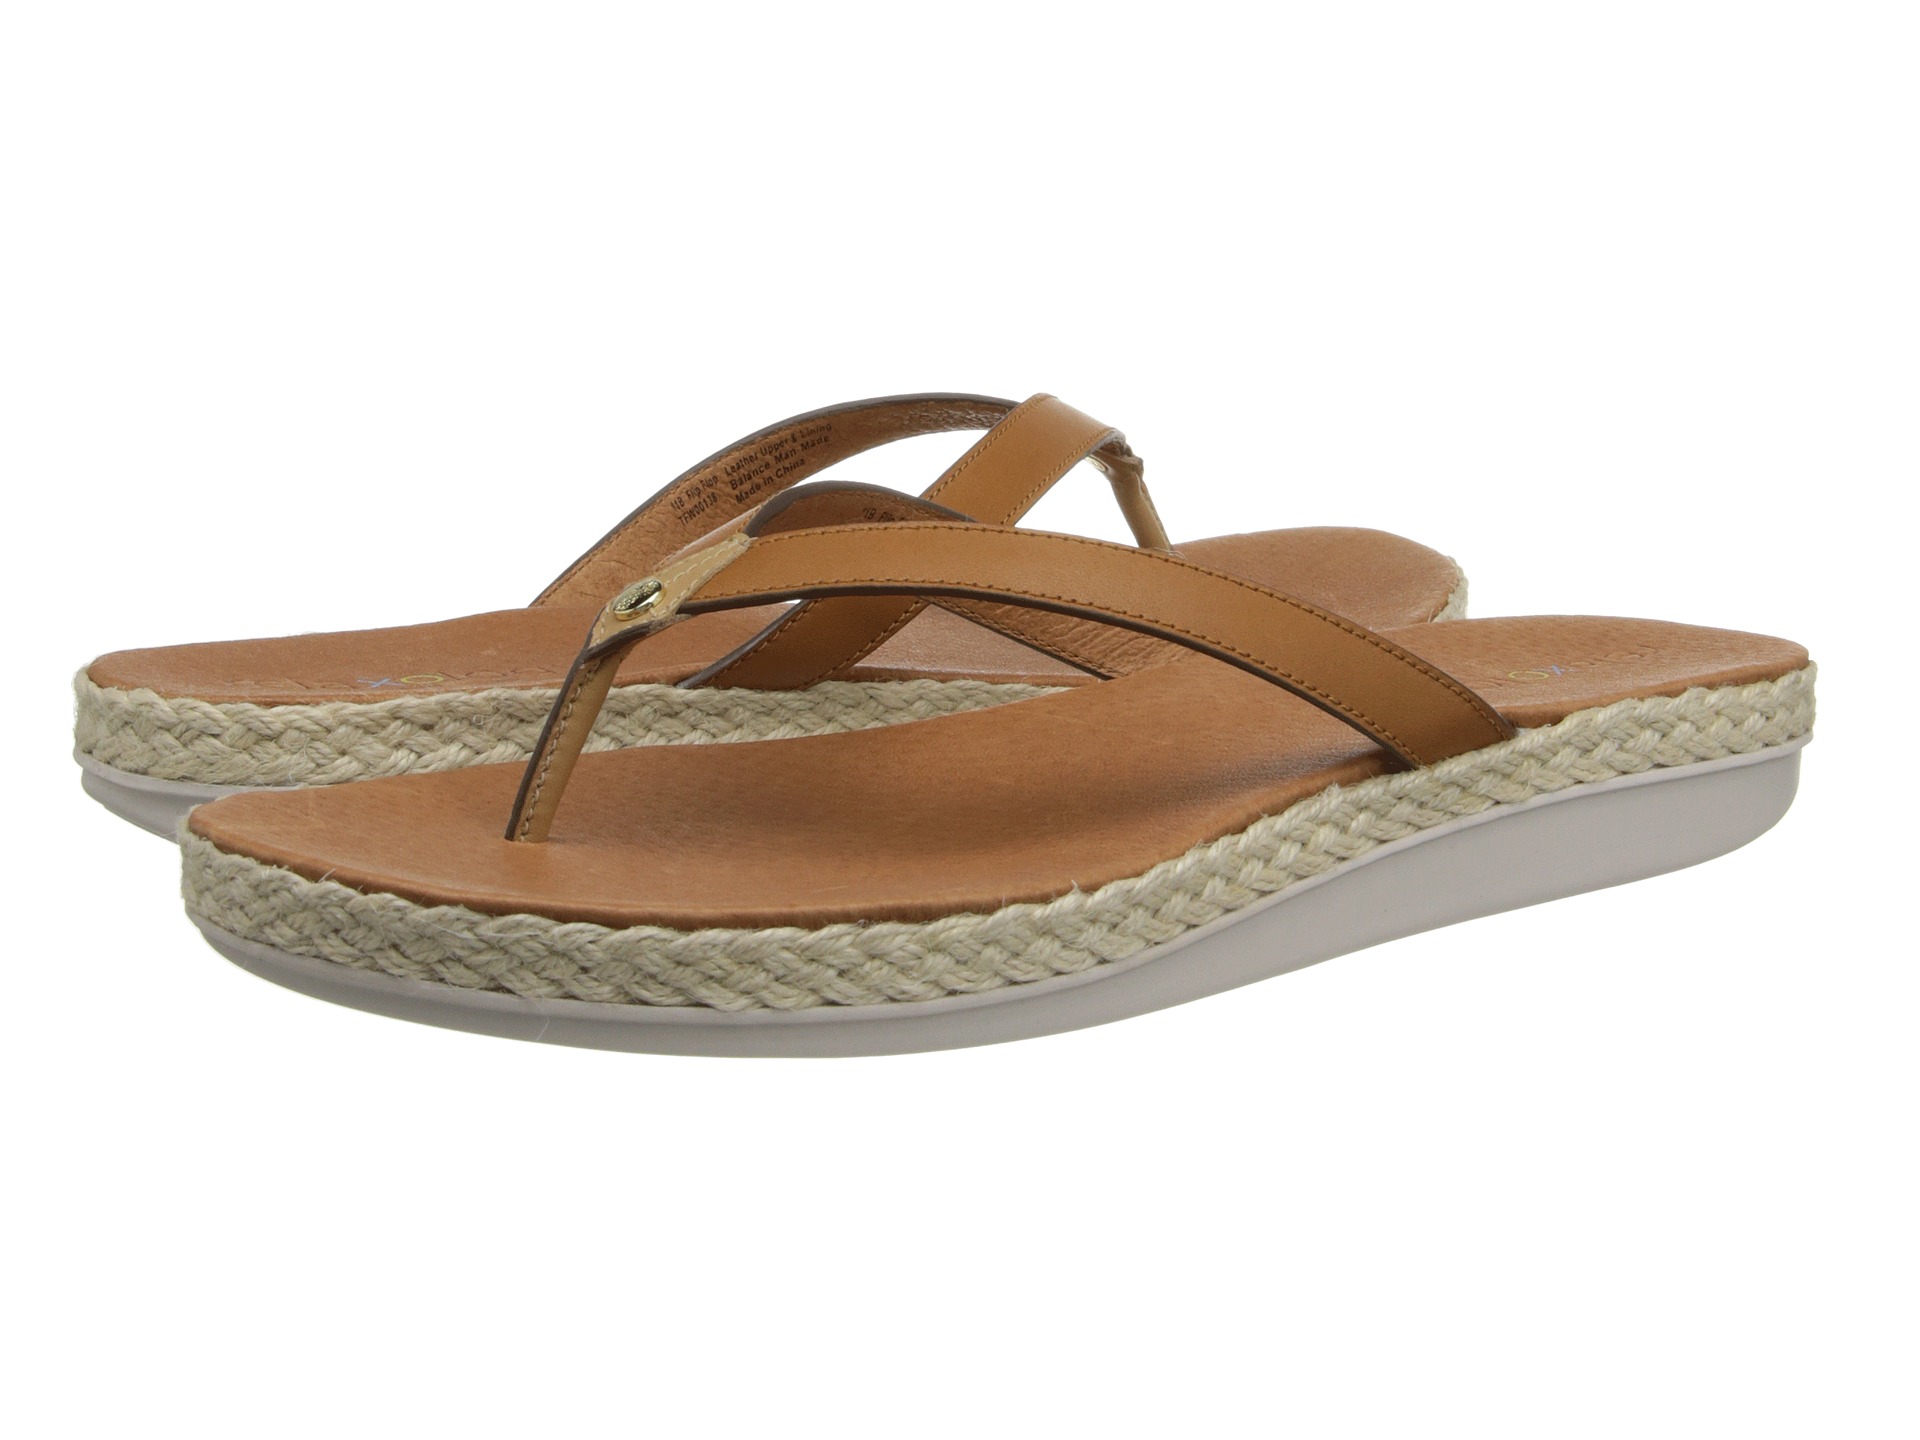 Tommy Bahama Relaxology Flip Flop | Shipped Free at Zappos